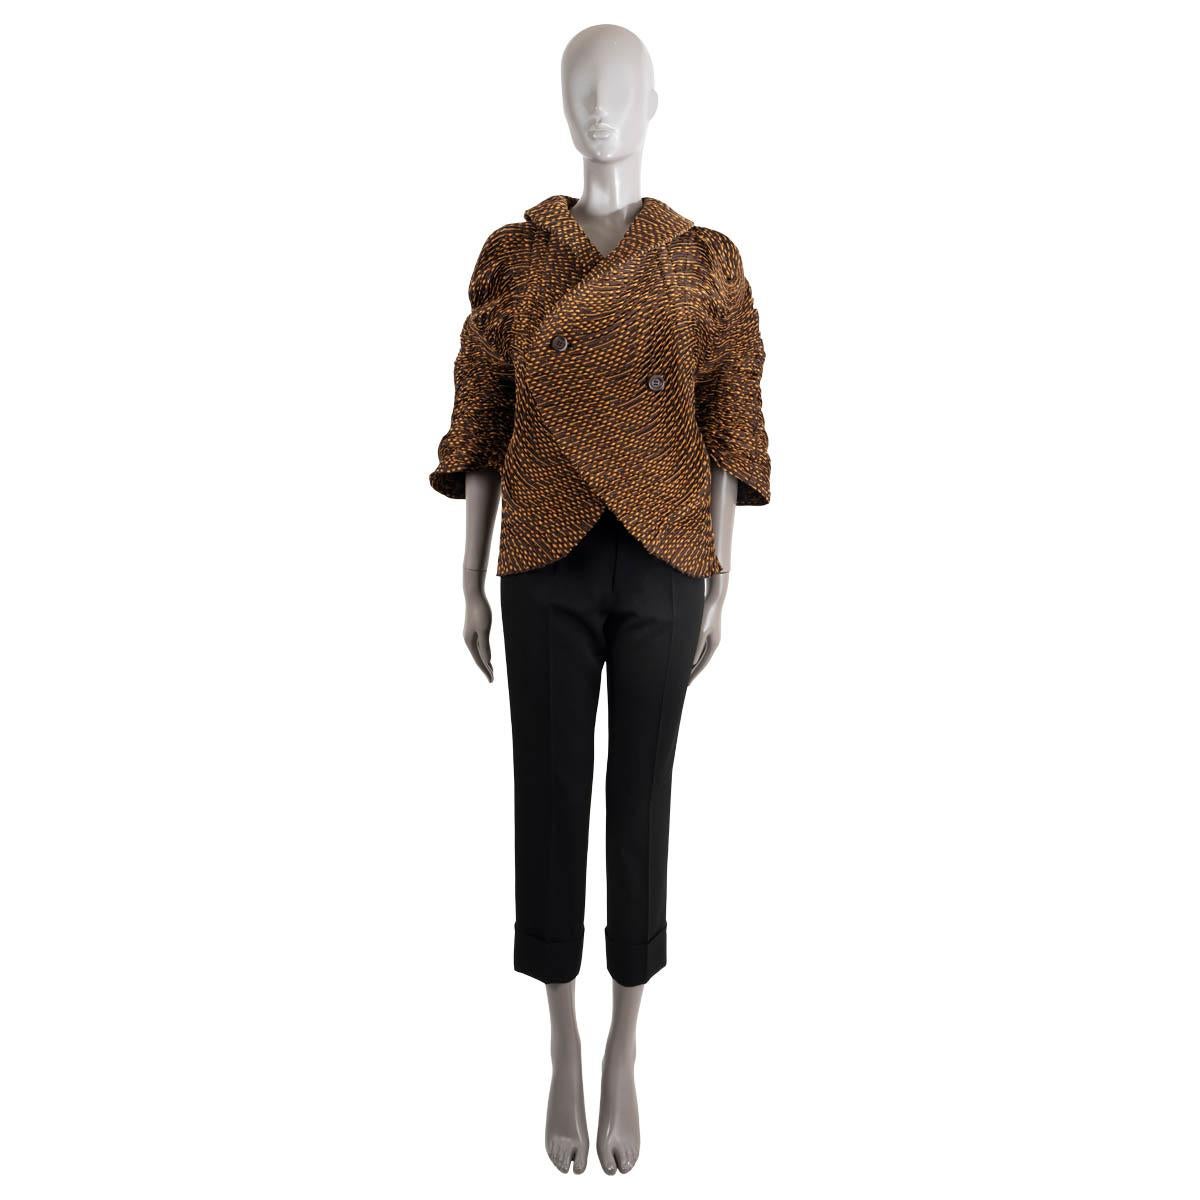 100% authentic Issey Miyake 3/4 sleeve shawl collar jacquard blouse in stretchy brown and orange wavey, gathered polyester (80%), cotton (38%) and polyurethane (2%). Button closure. Unlined. Has been worn and is in excellent condition.